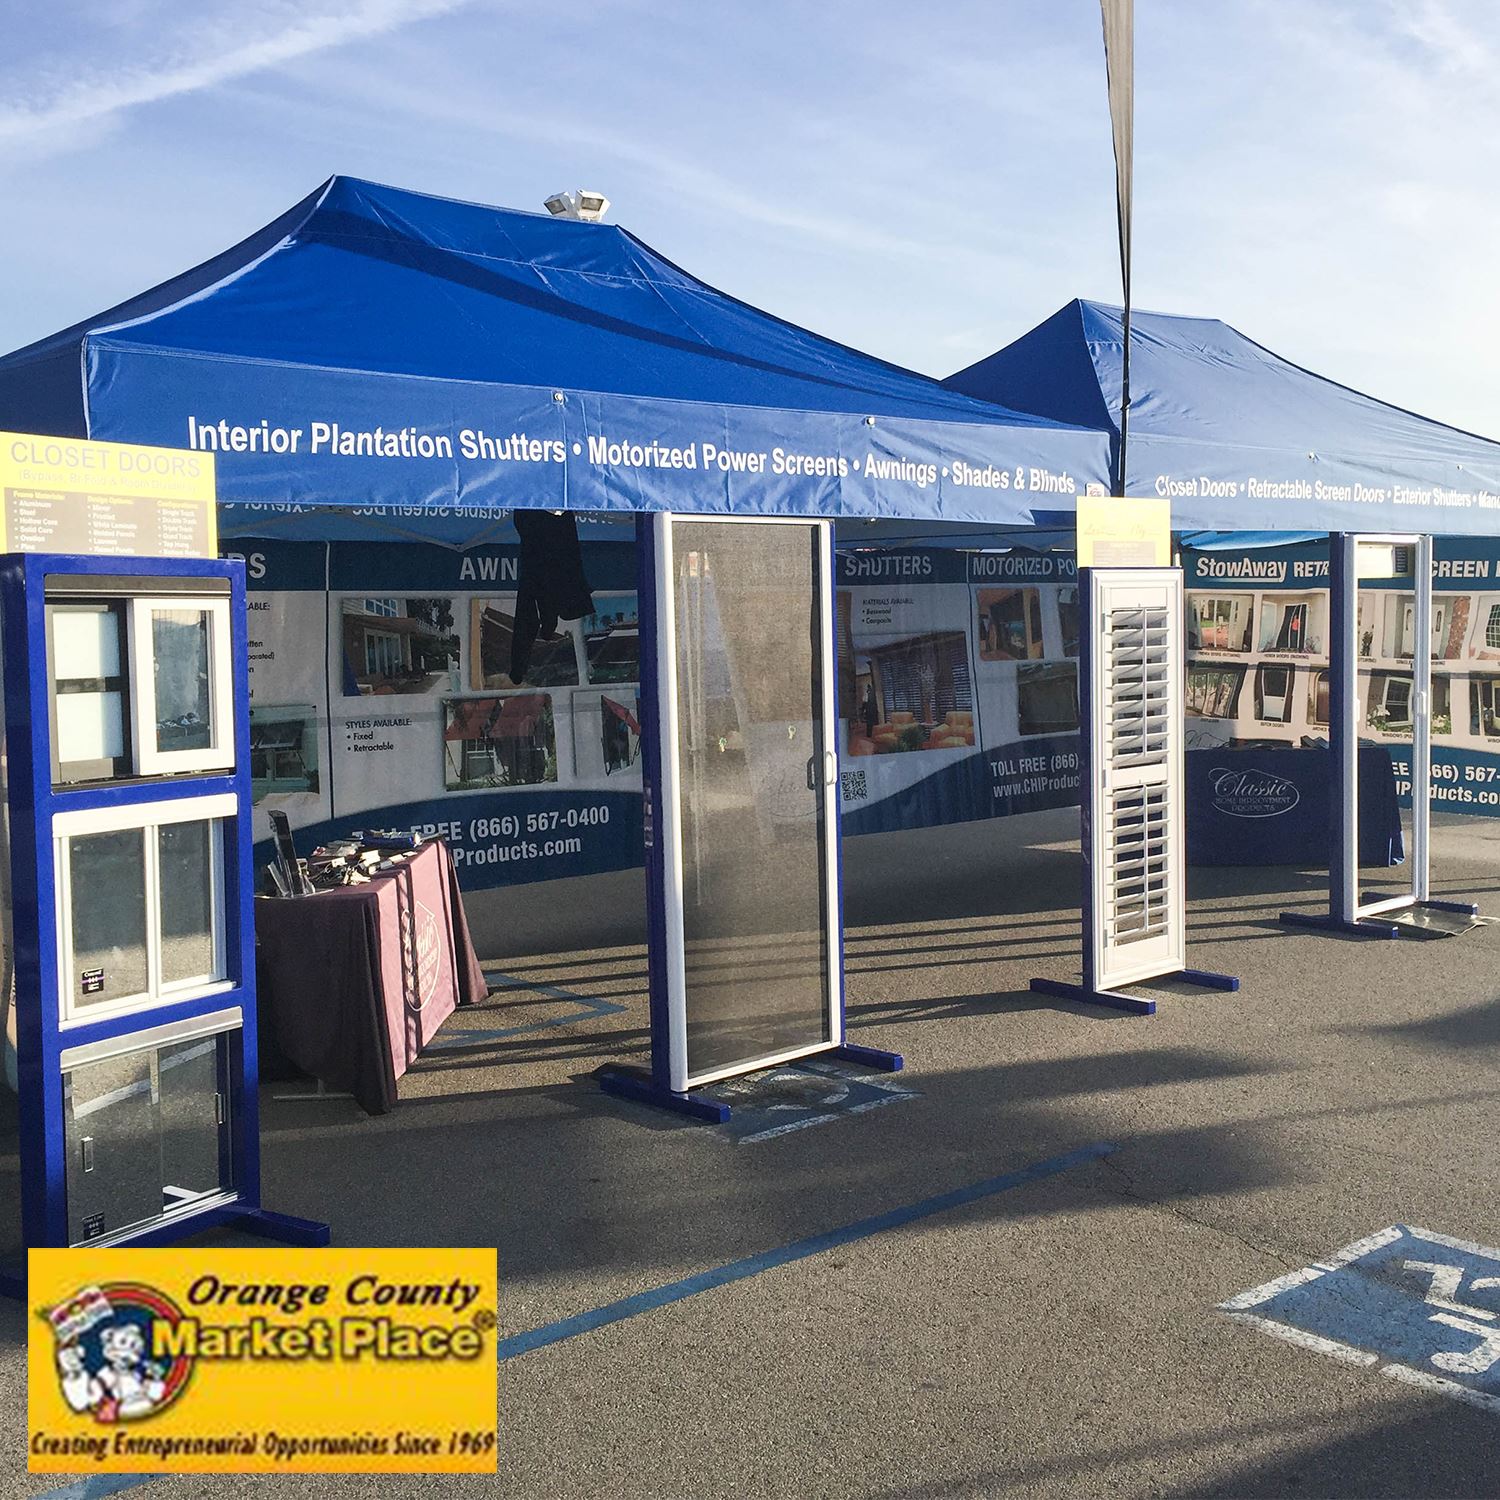 Classic Improvement Products booth at Orange County Swap Meet in Costa Mesa